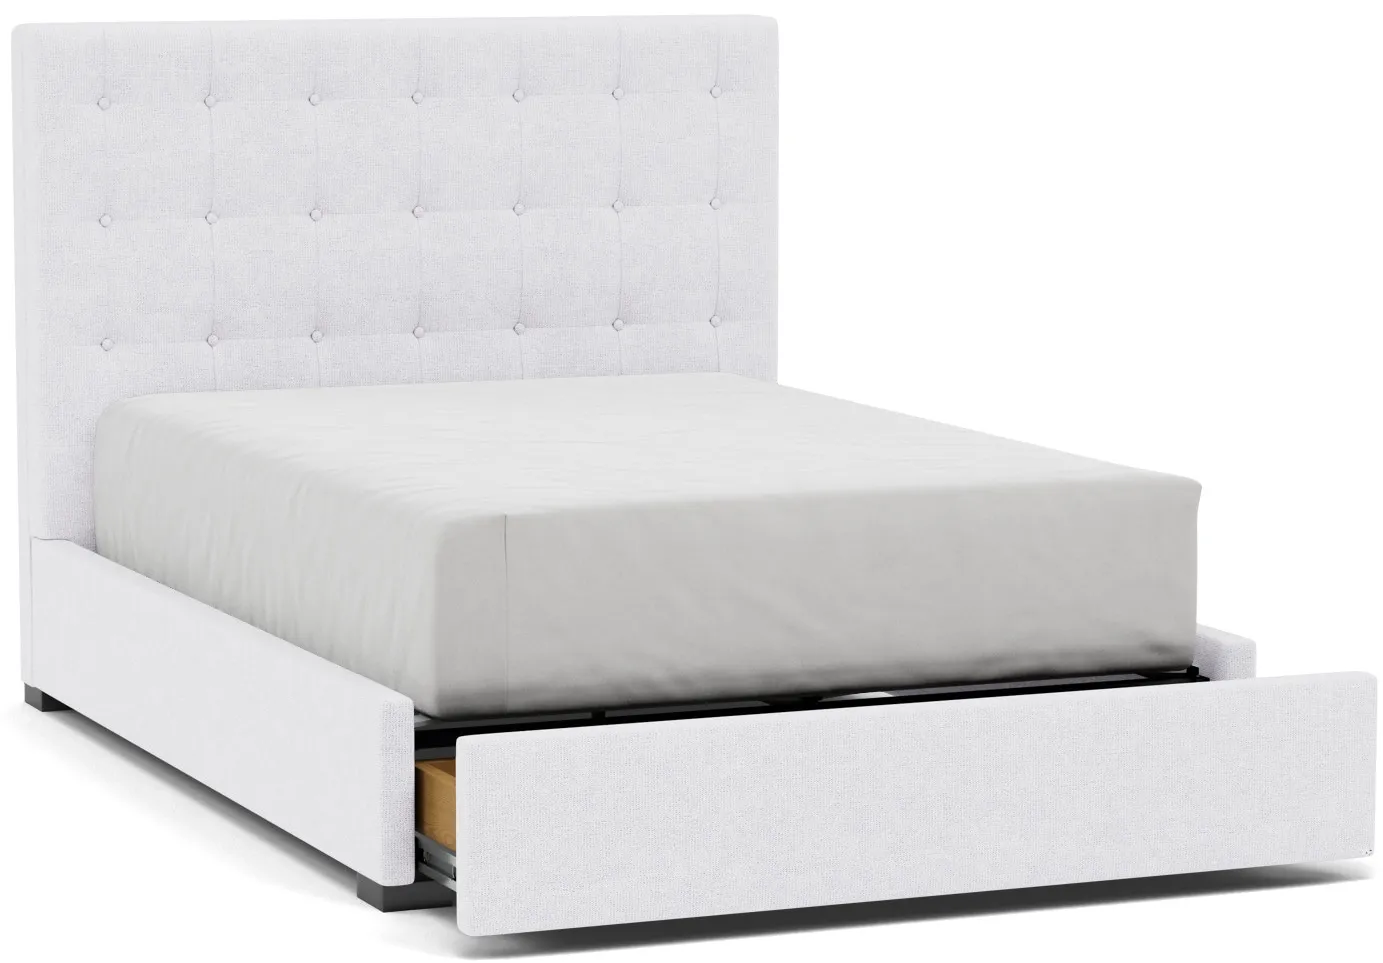 Abby Queen Upholstered Storage Bed in Tech Arctic